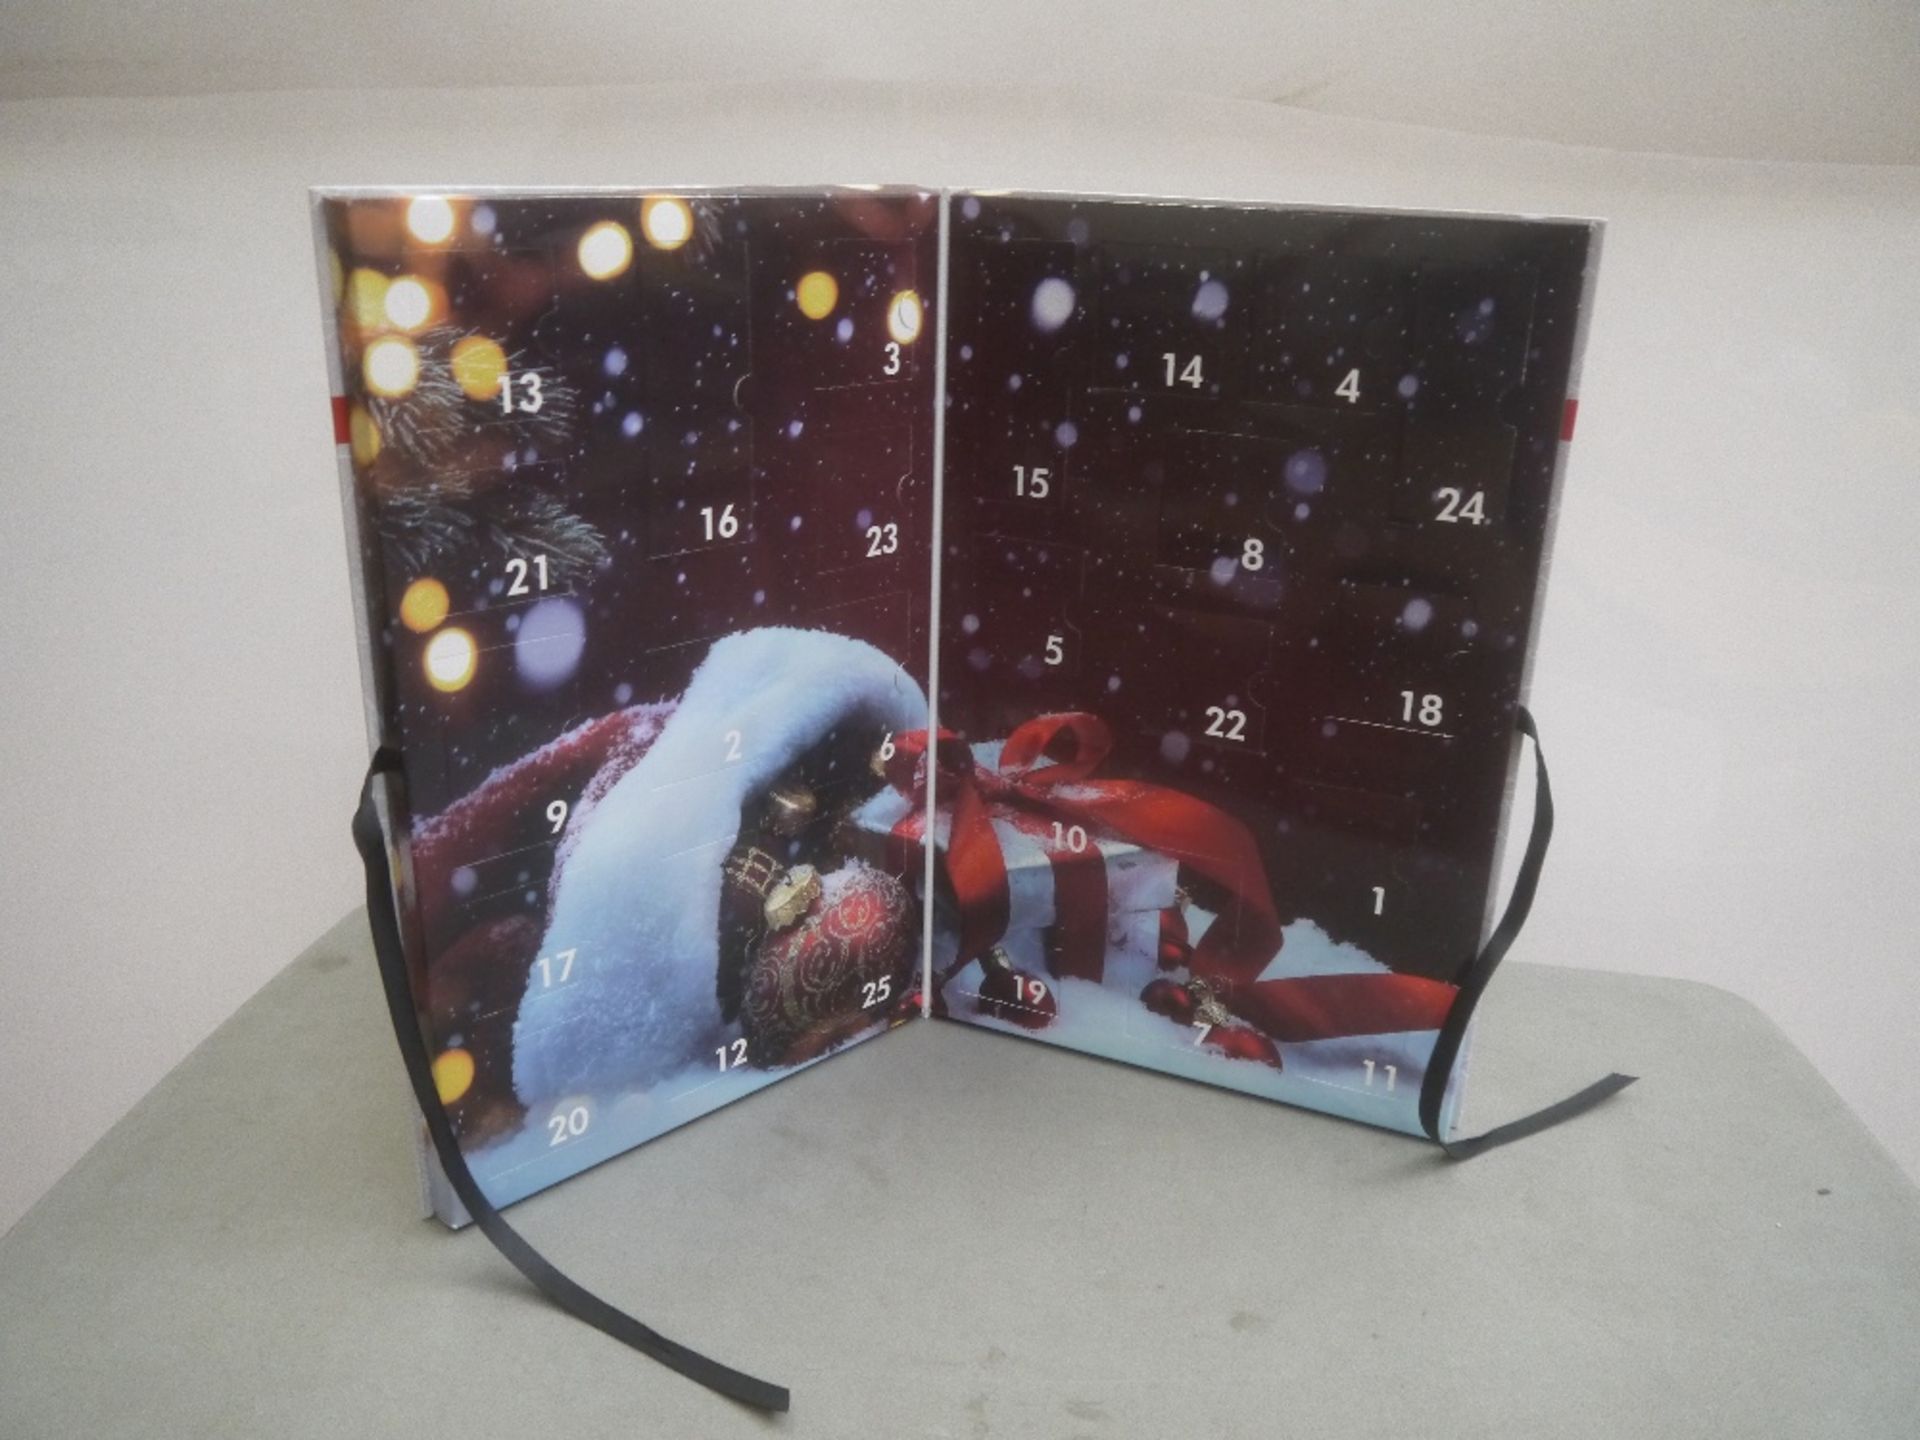 NO VAT!! Brand New Fifth NYC Luxury Jewellery Advent Calender, RRP £199, The ideal Christmas gift,